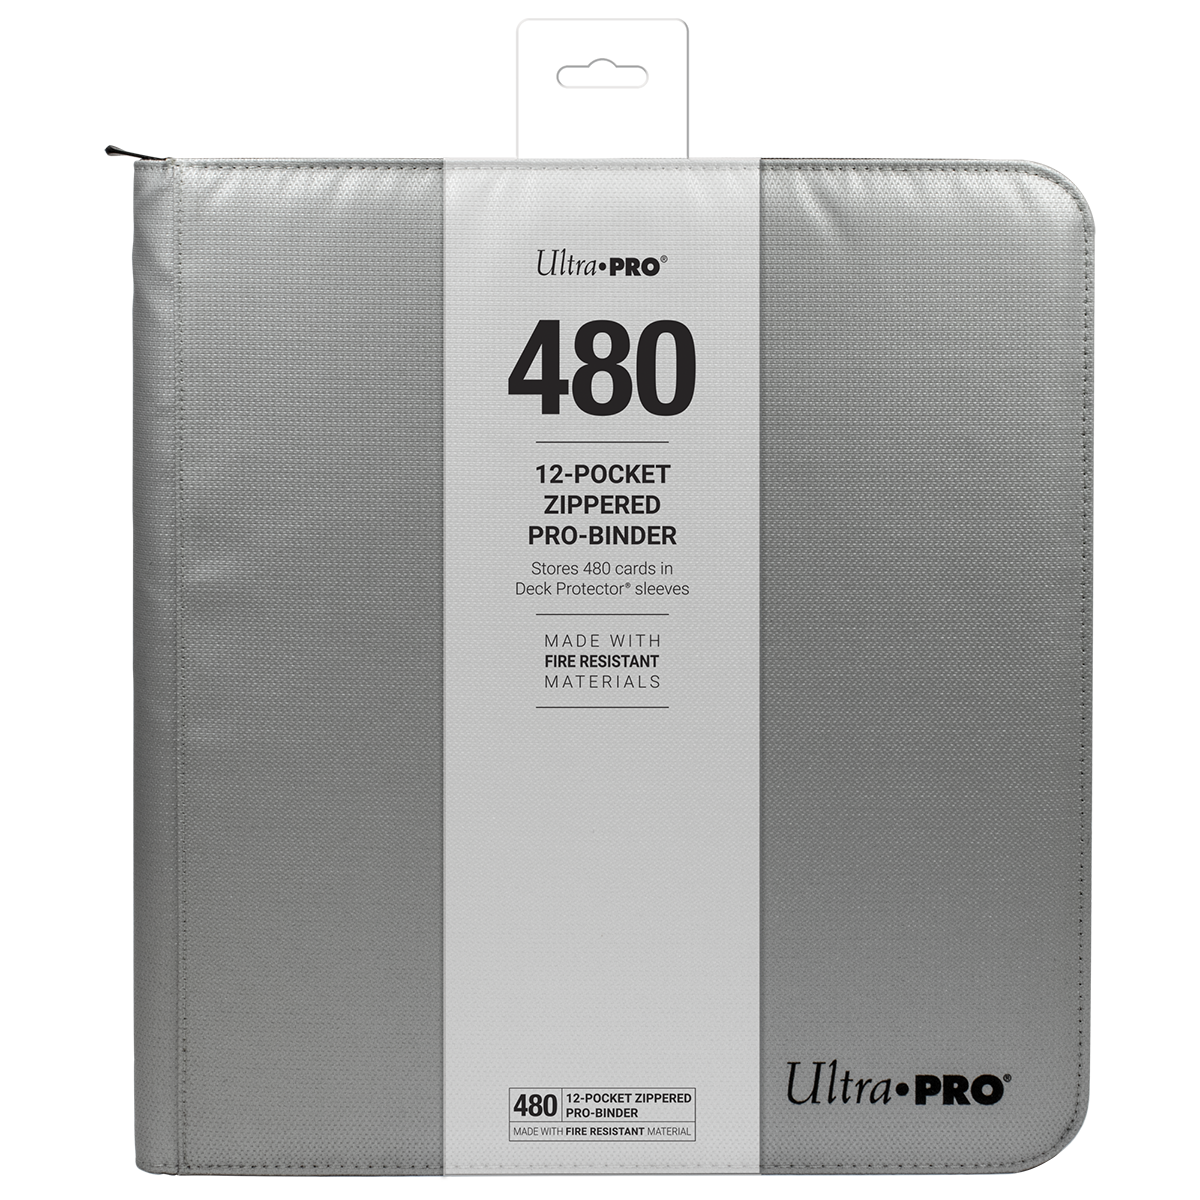 Ultra PRO 12-Pocket Zippered PRO-Binder: Silver made with Fire